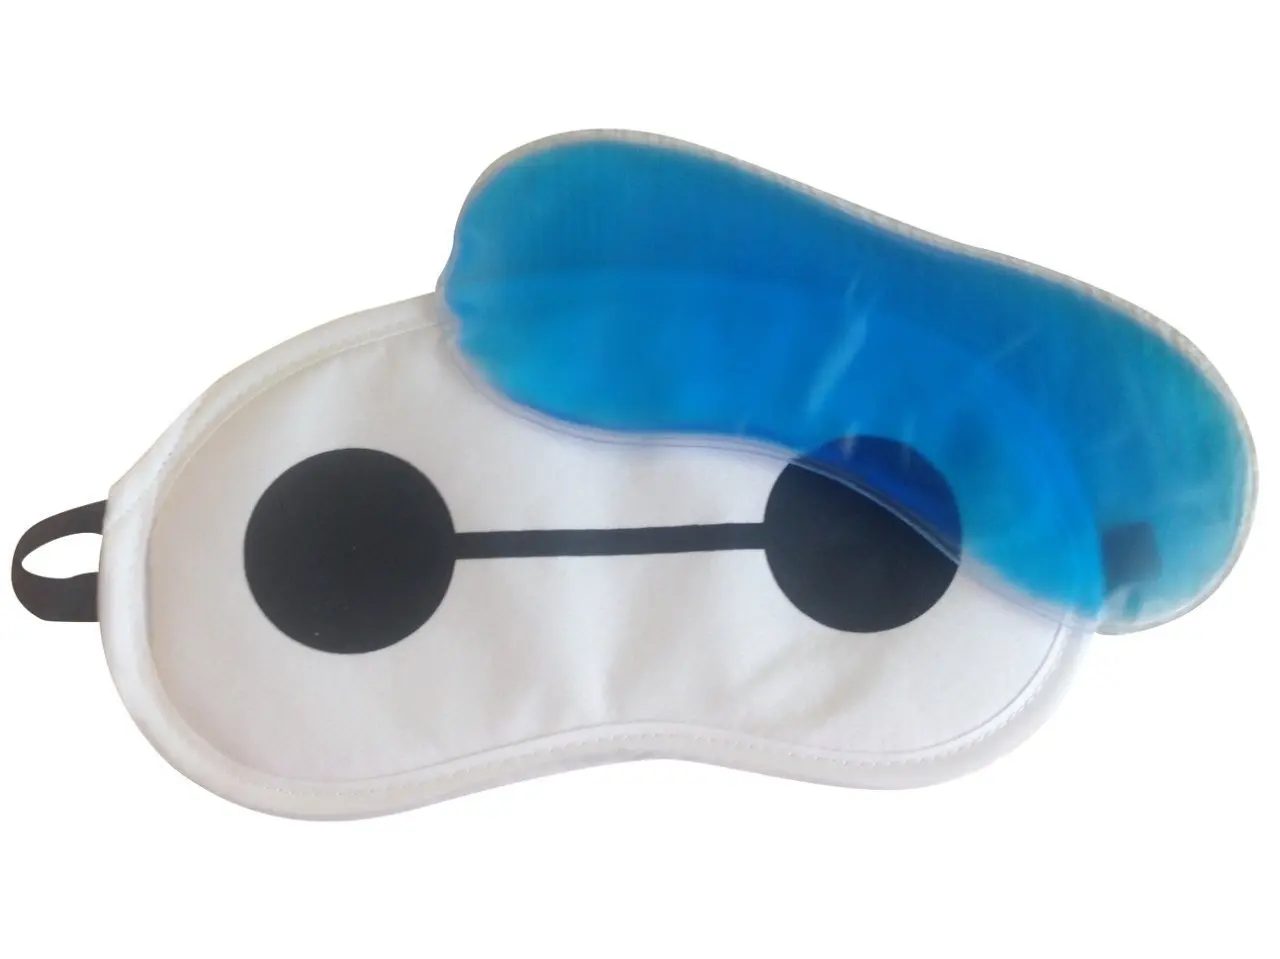 microwavable eye patch